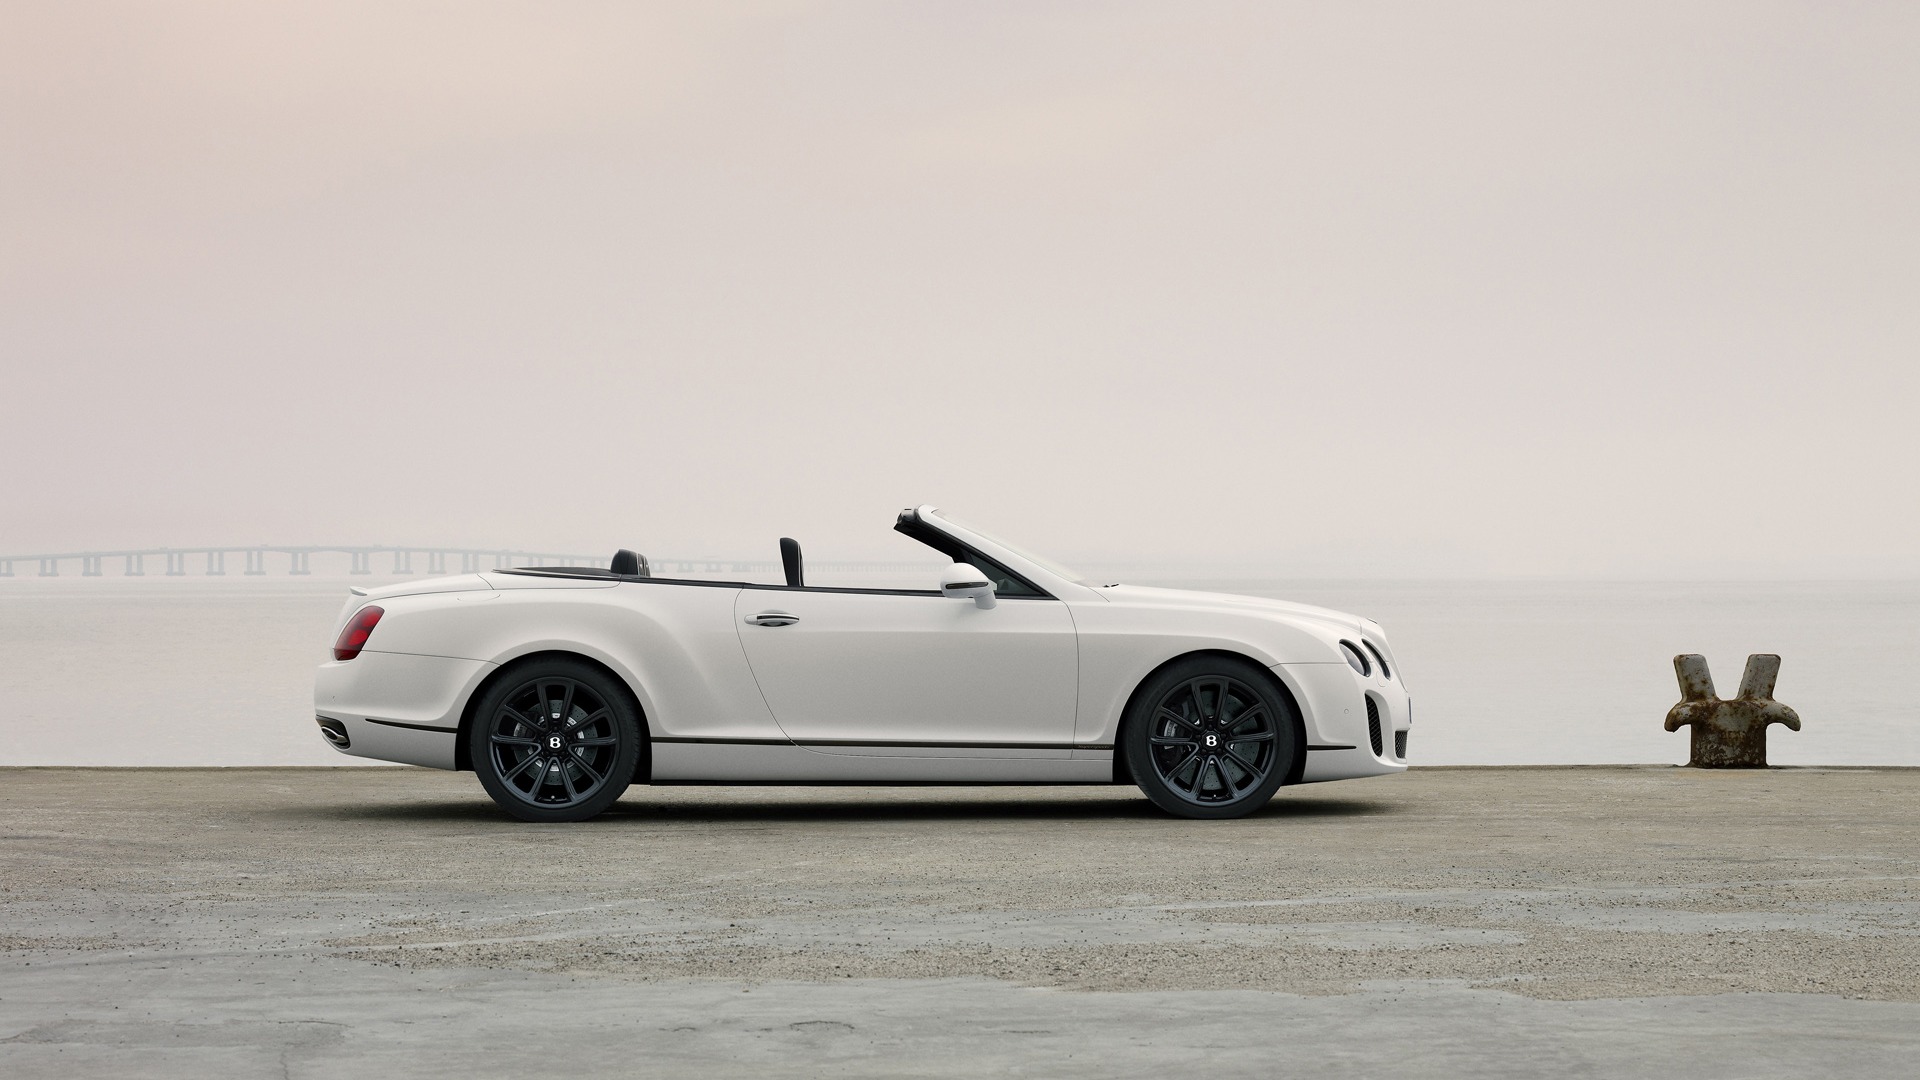 Bentley Continental Supersports Convertible - 2010 宾利33 - 1920x1080